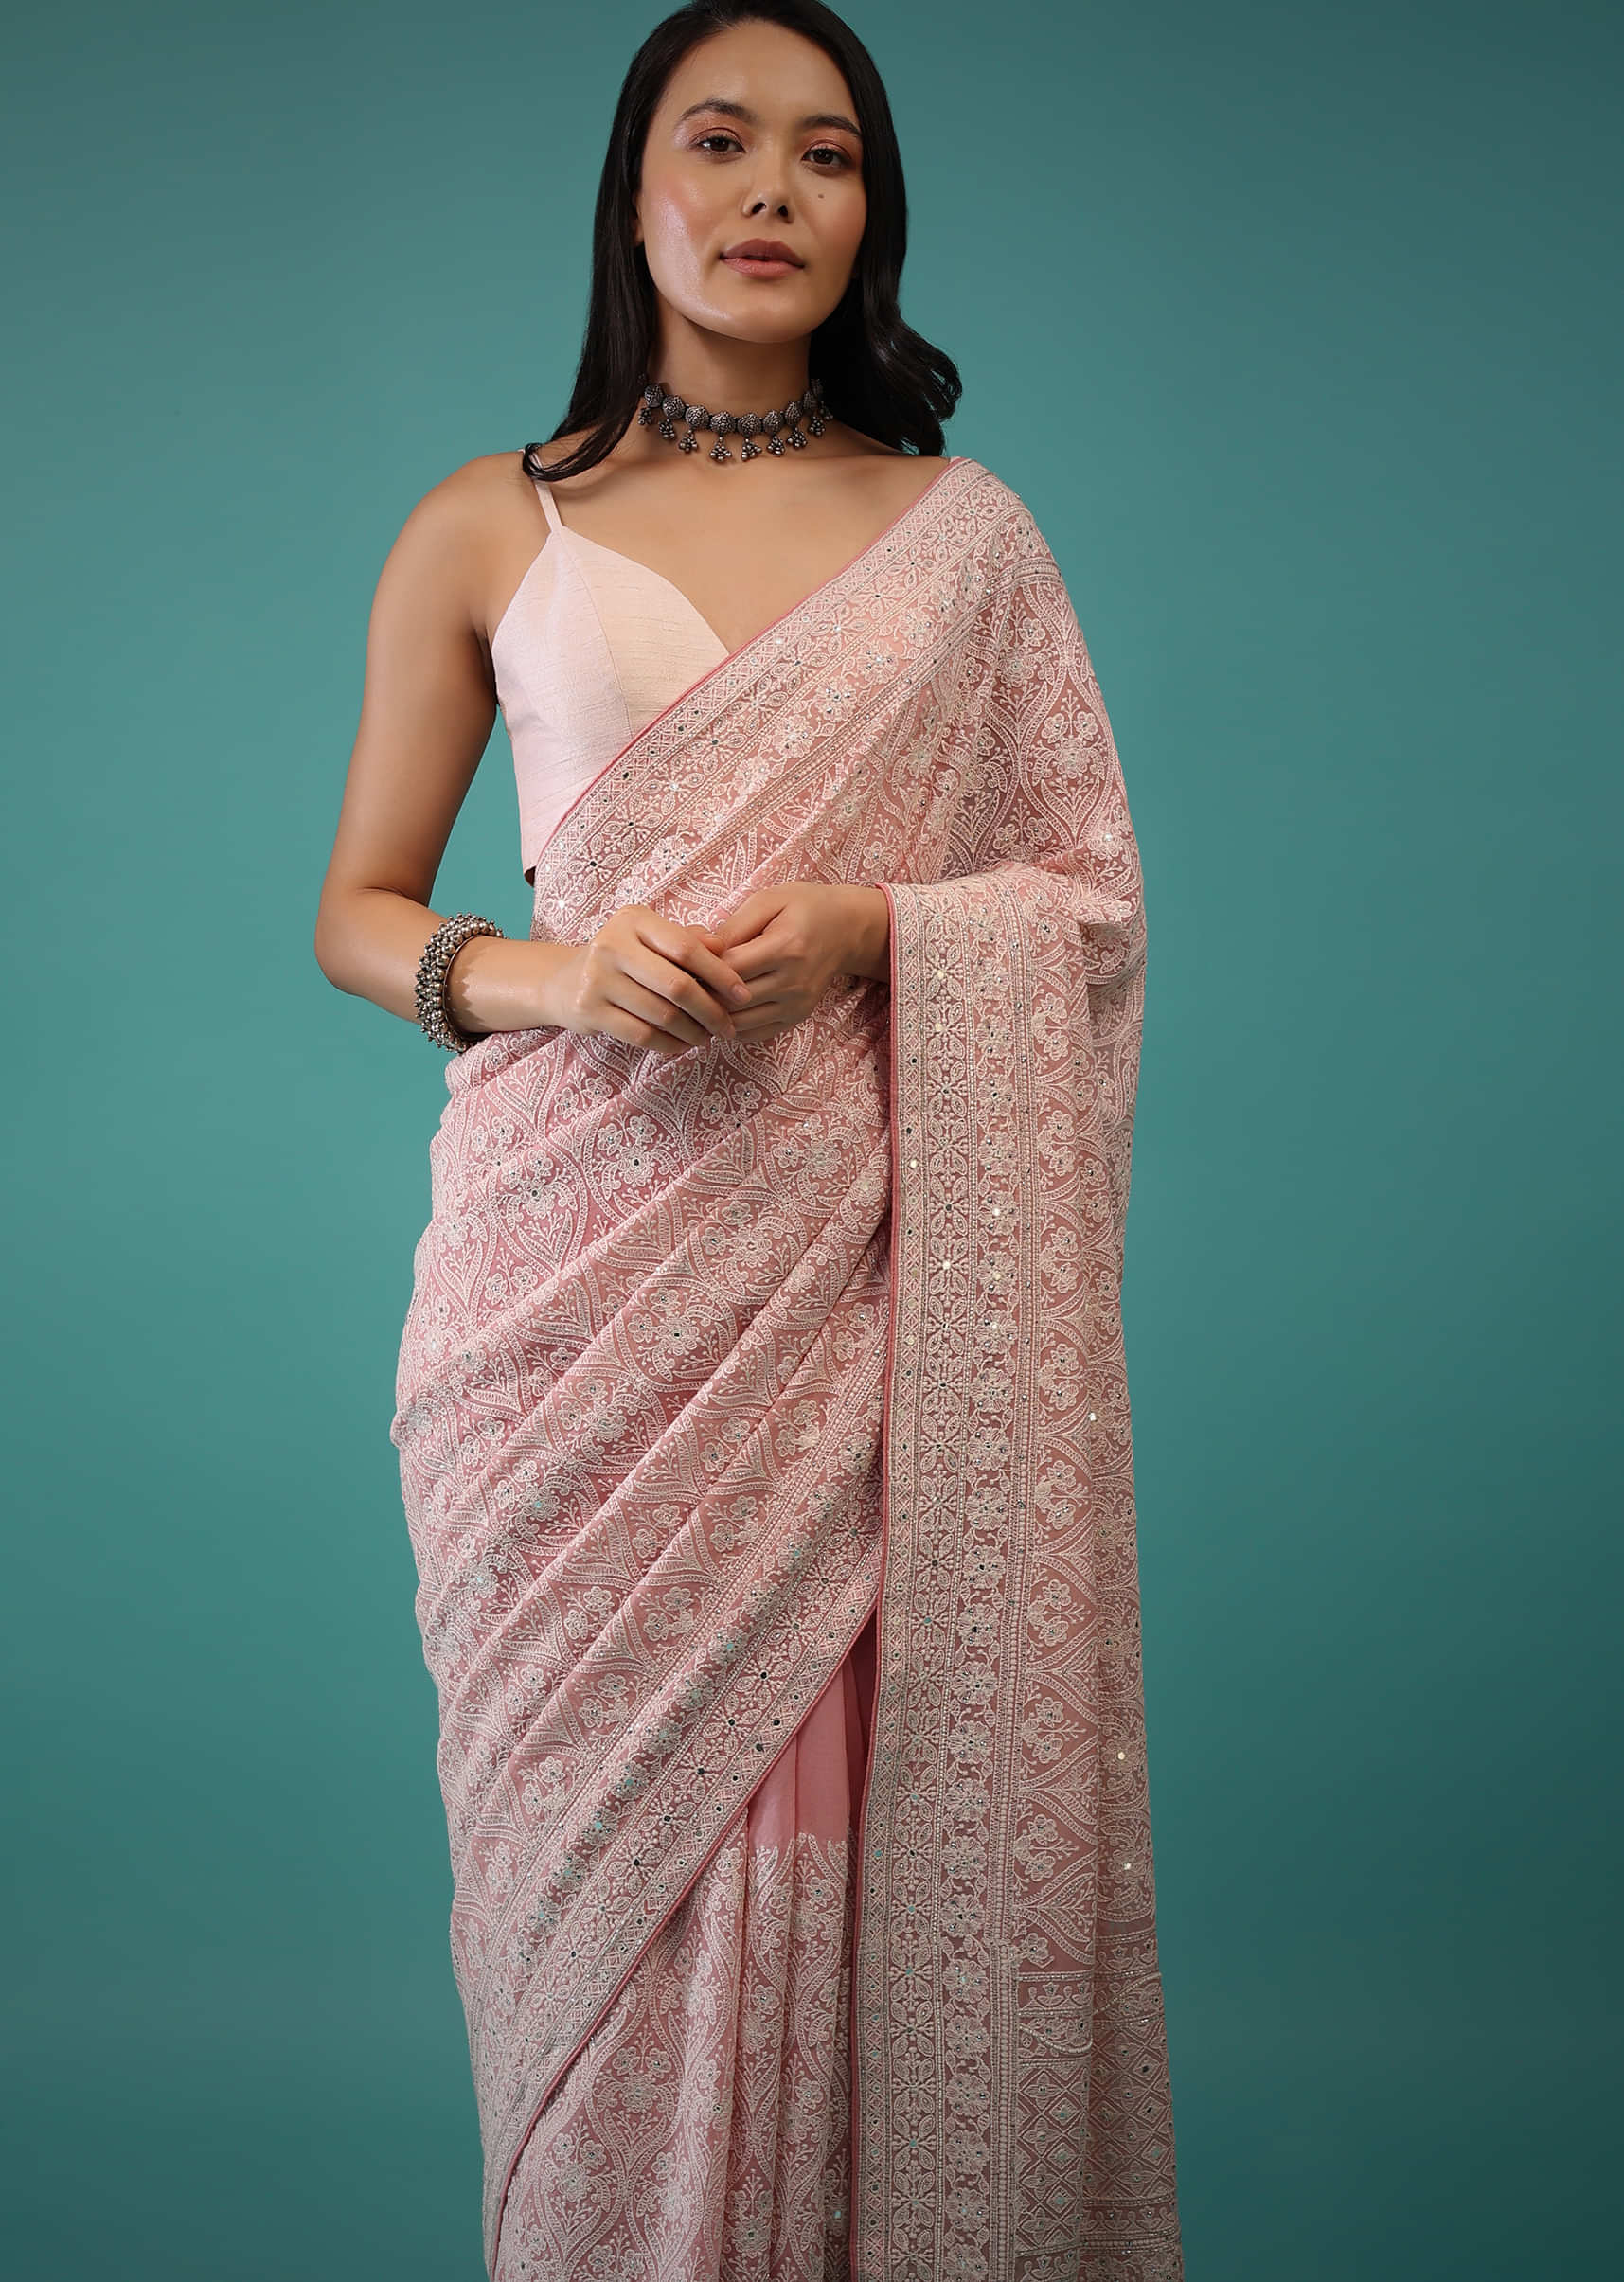 Peach Georgette Saree In Lucknowi Threadwork In A Moroccan Jaal, It Has Sequins, Cut Dana Embroidery Buttis On The Pallu 